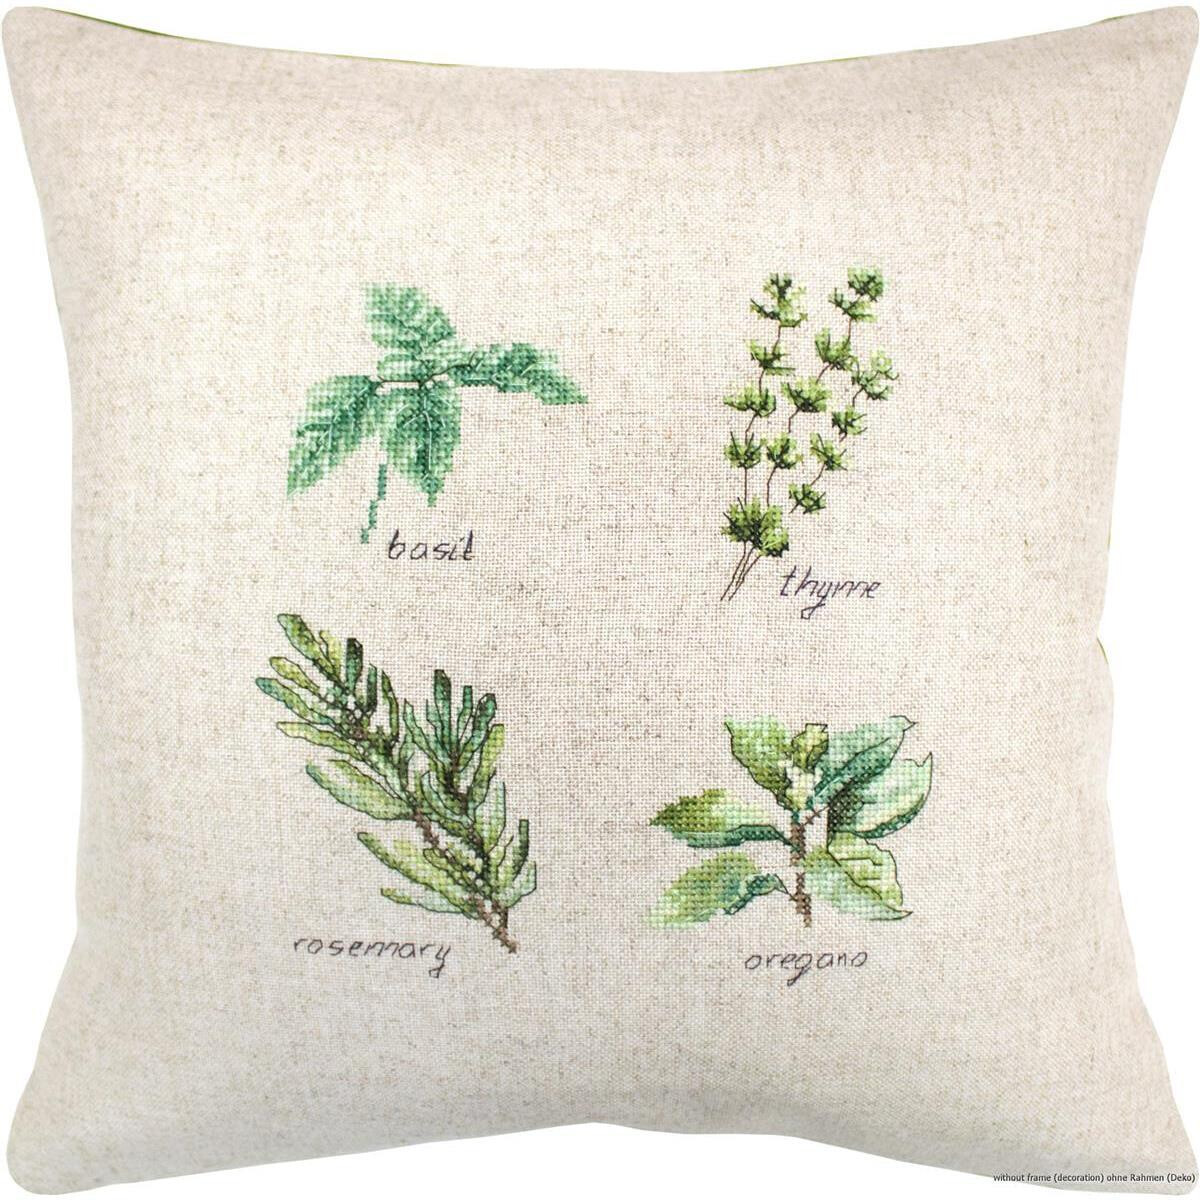 A square beige cushion with embroidered images of four...